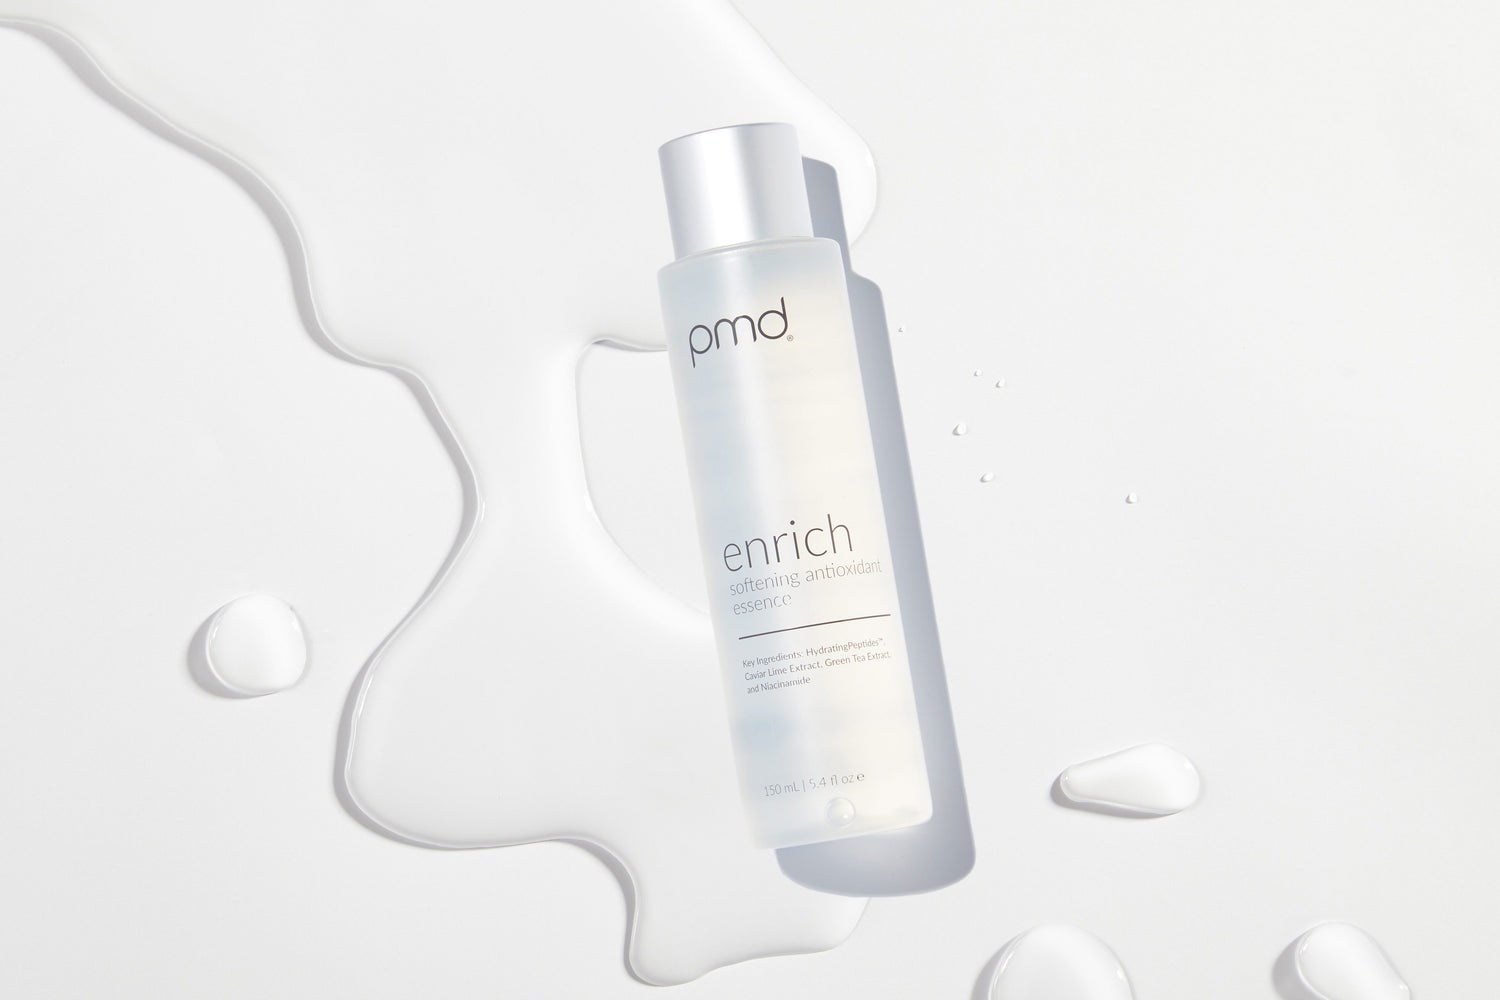 enrich essence bottle on white background with essence spilled out